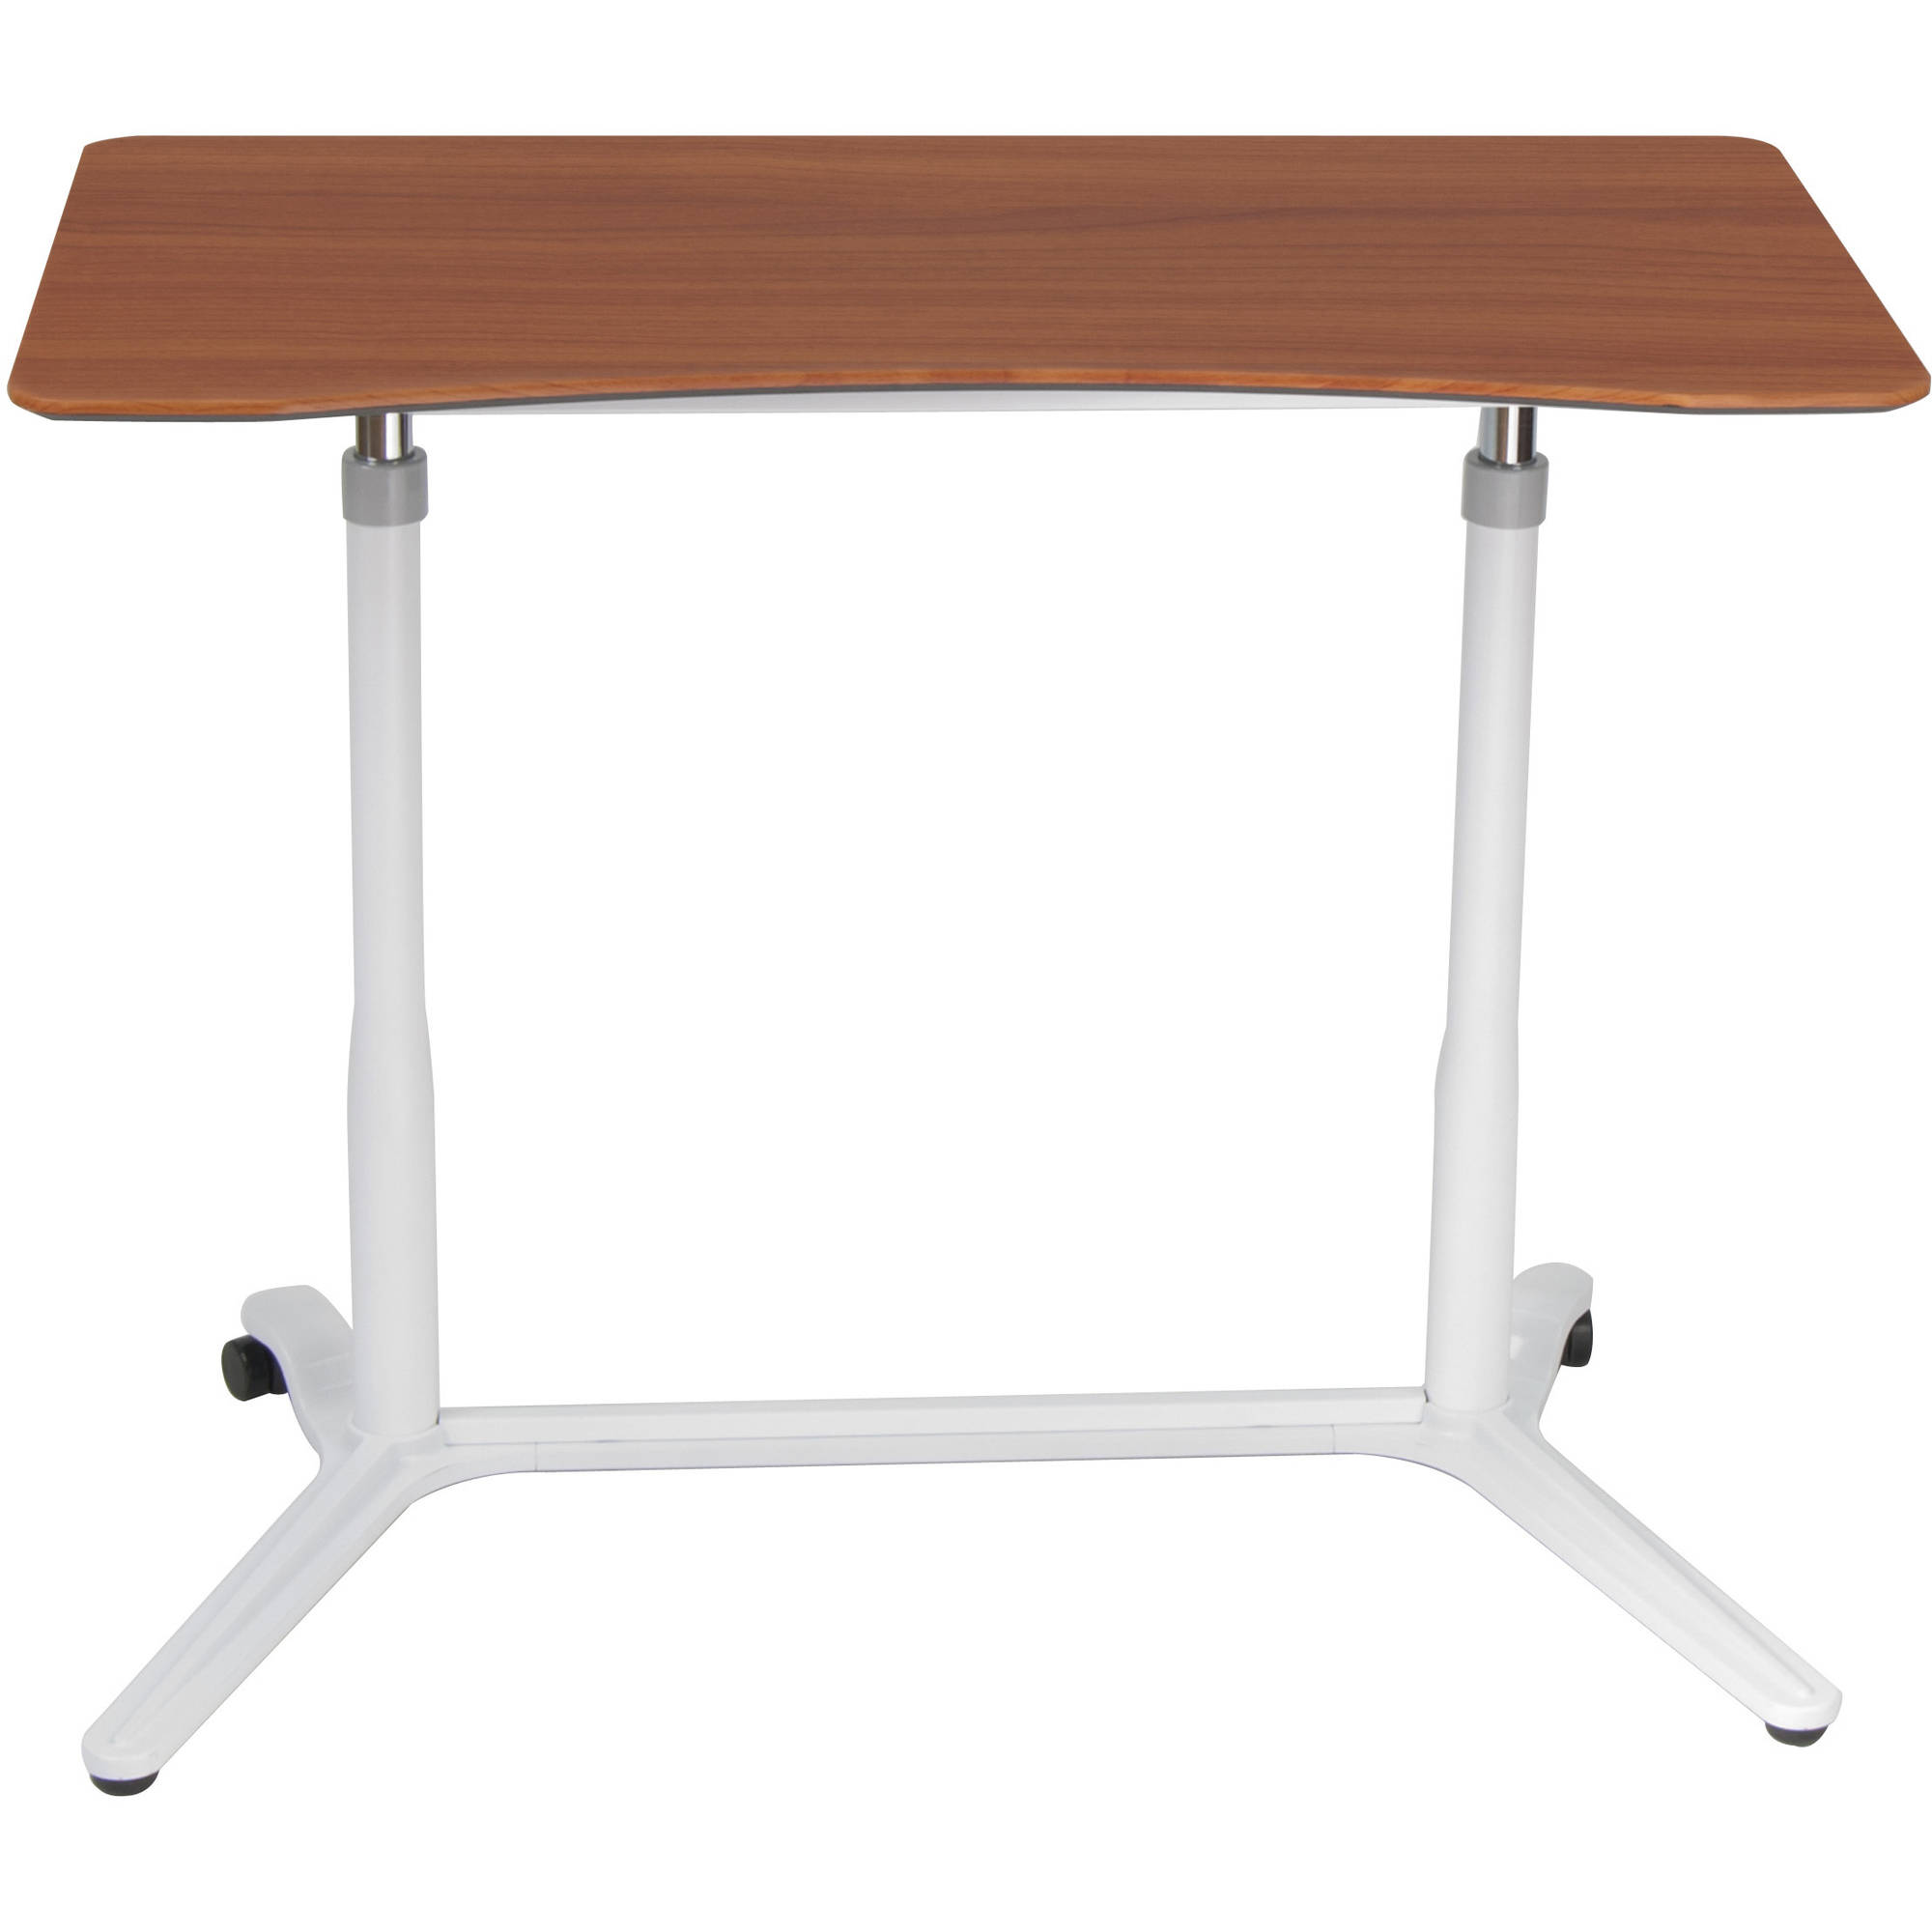 Calico Designs Sierra Adjustable Height Sit-to Stand Desk in White / Cherry # 51231 - image 4 of 4